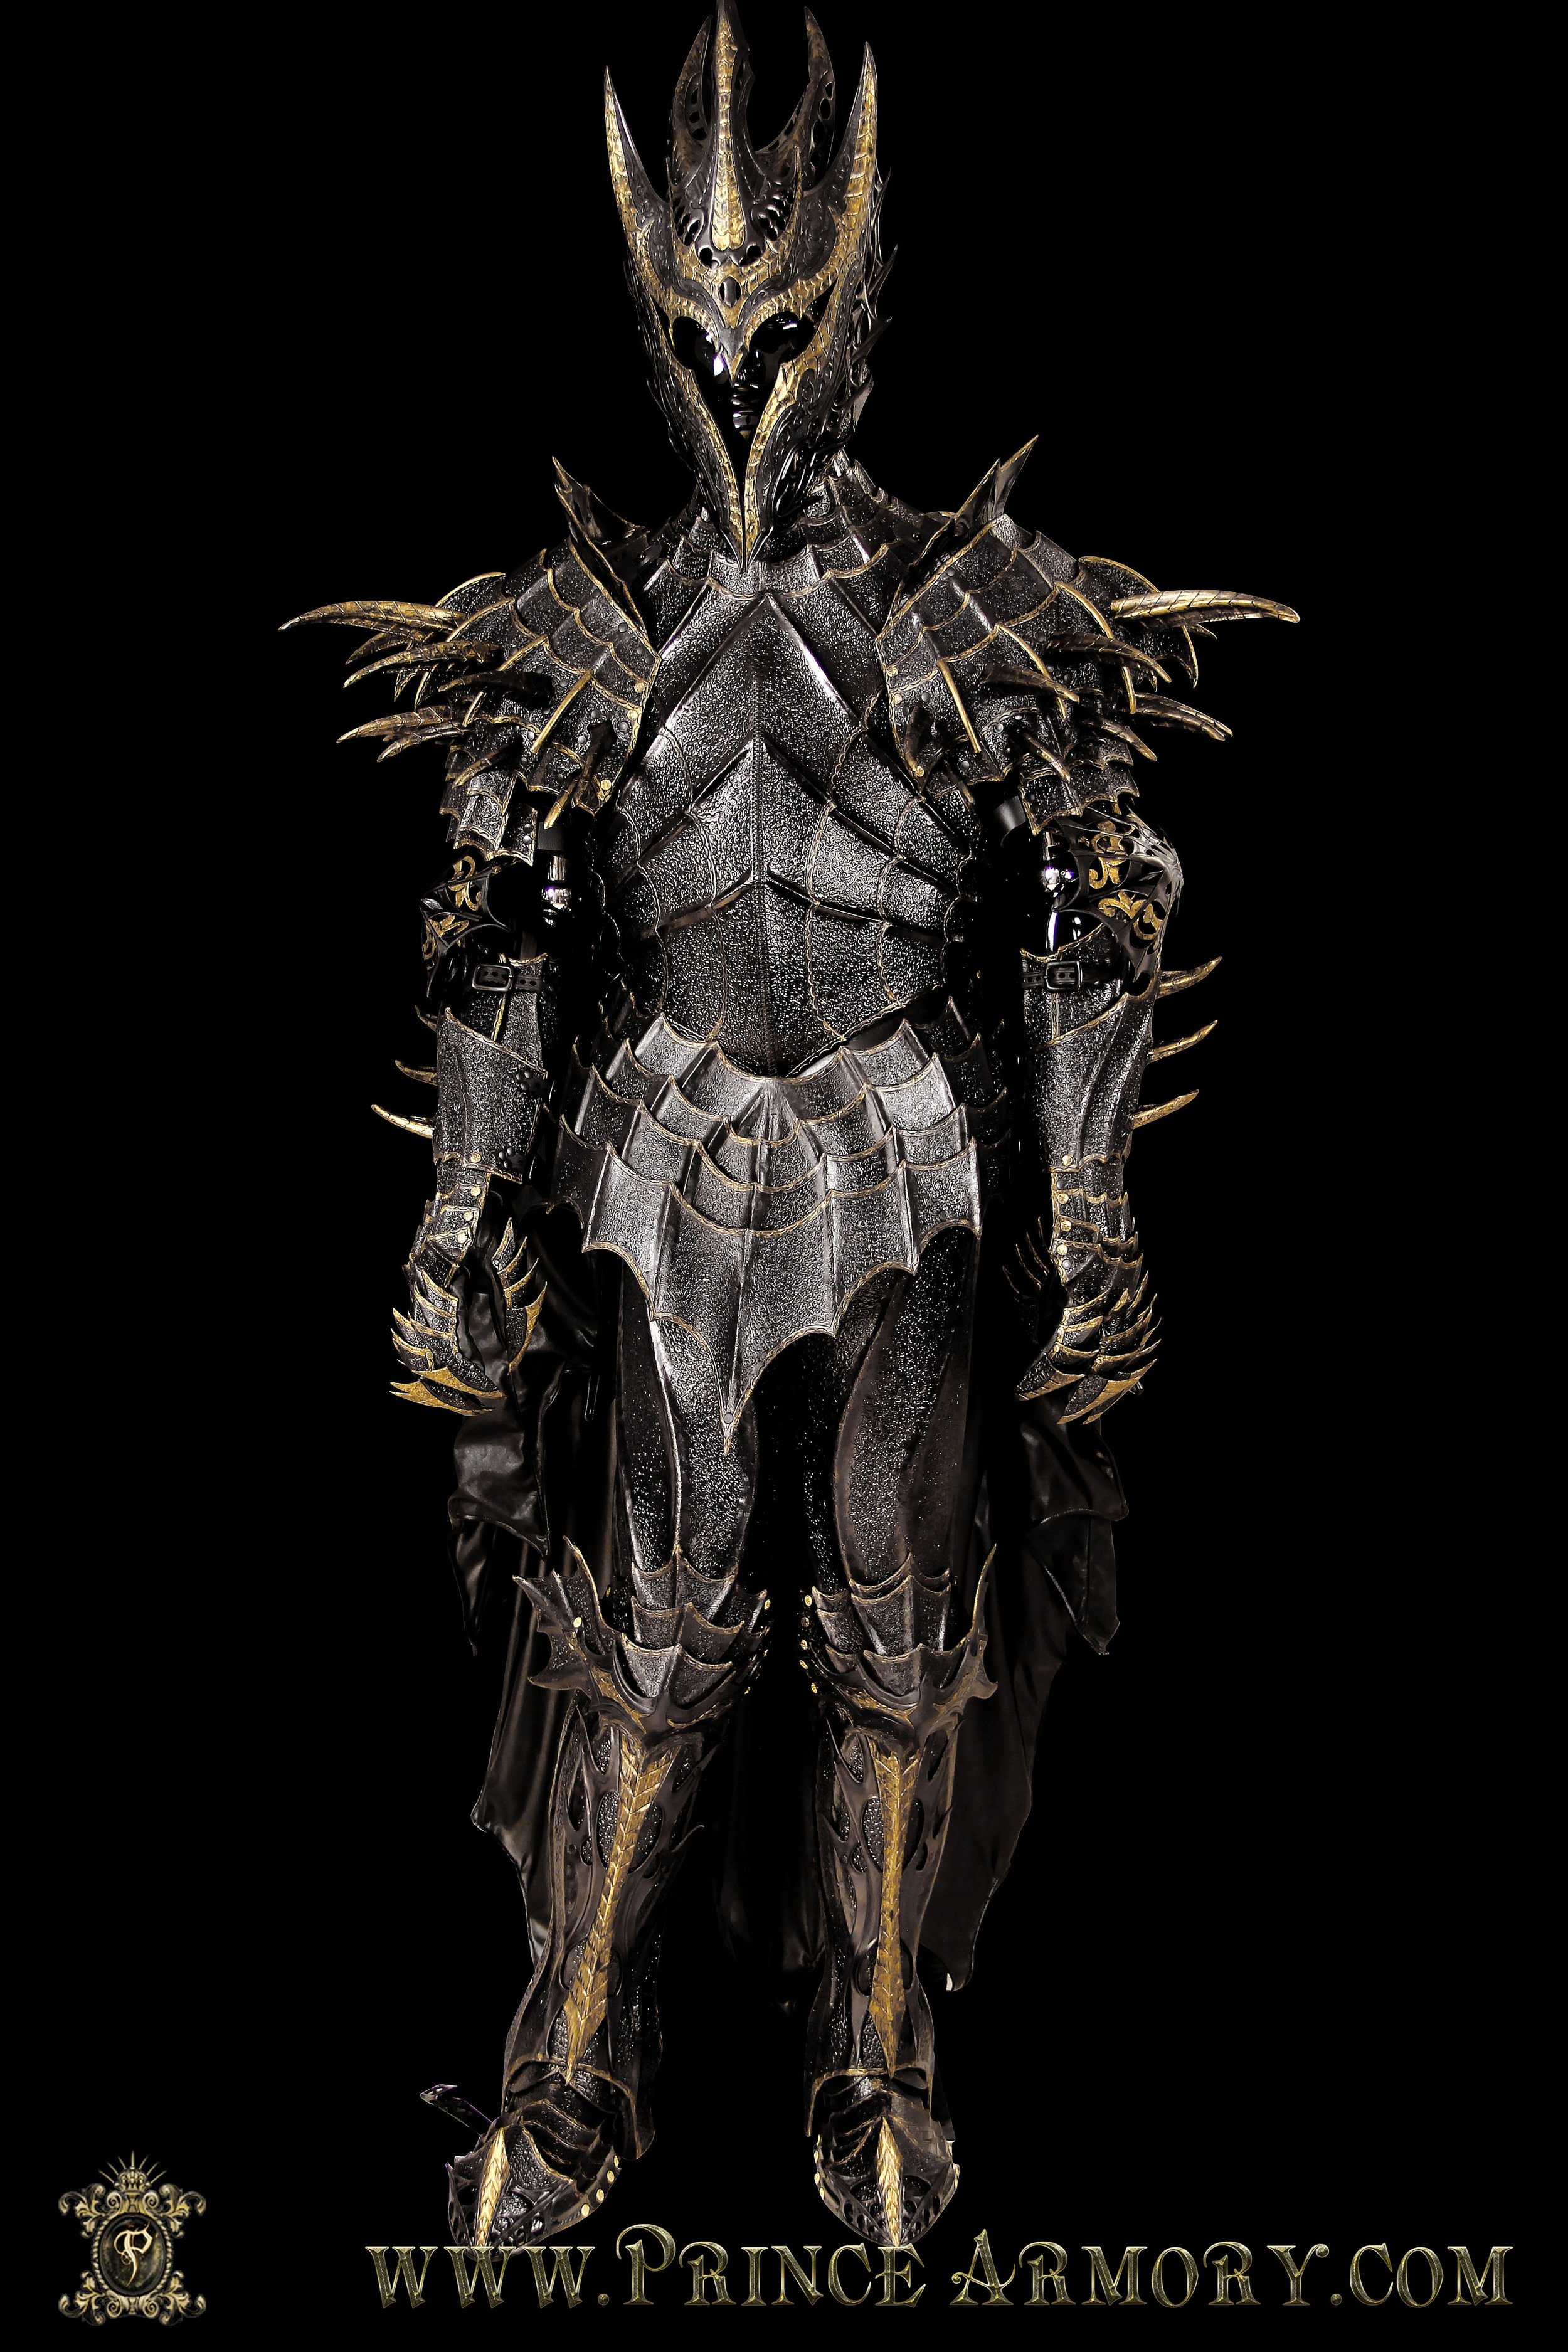 Origin/Inspiration/Meaning of Dark Lord Armor and fortress design language?  : r/lotr